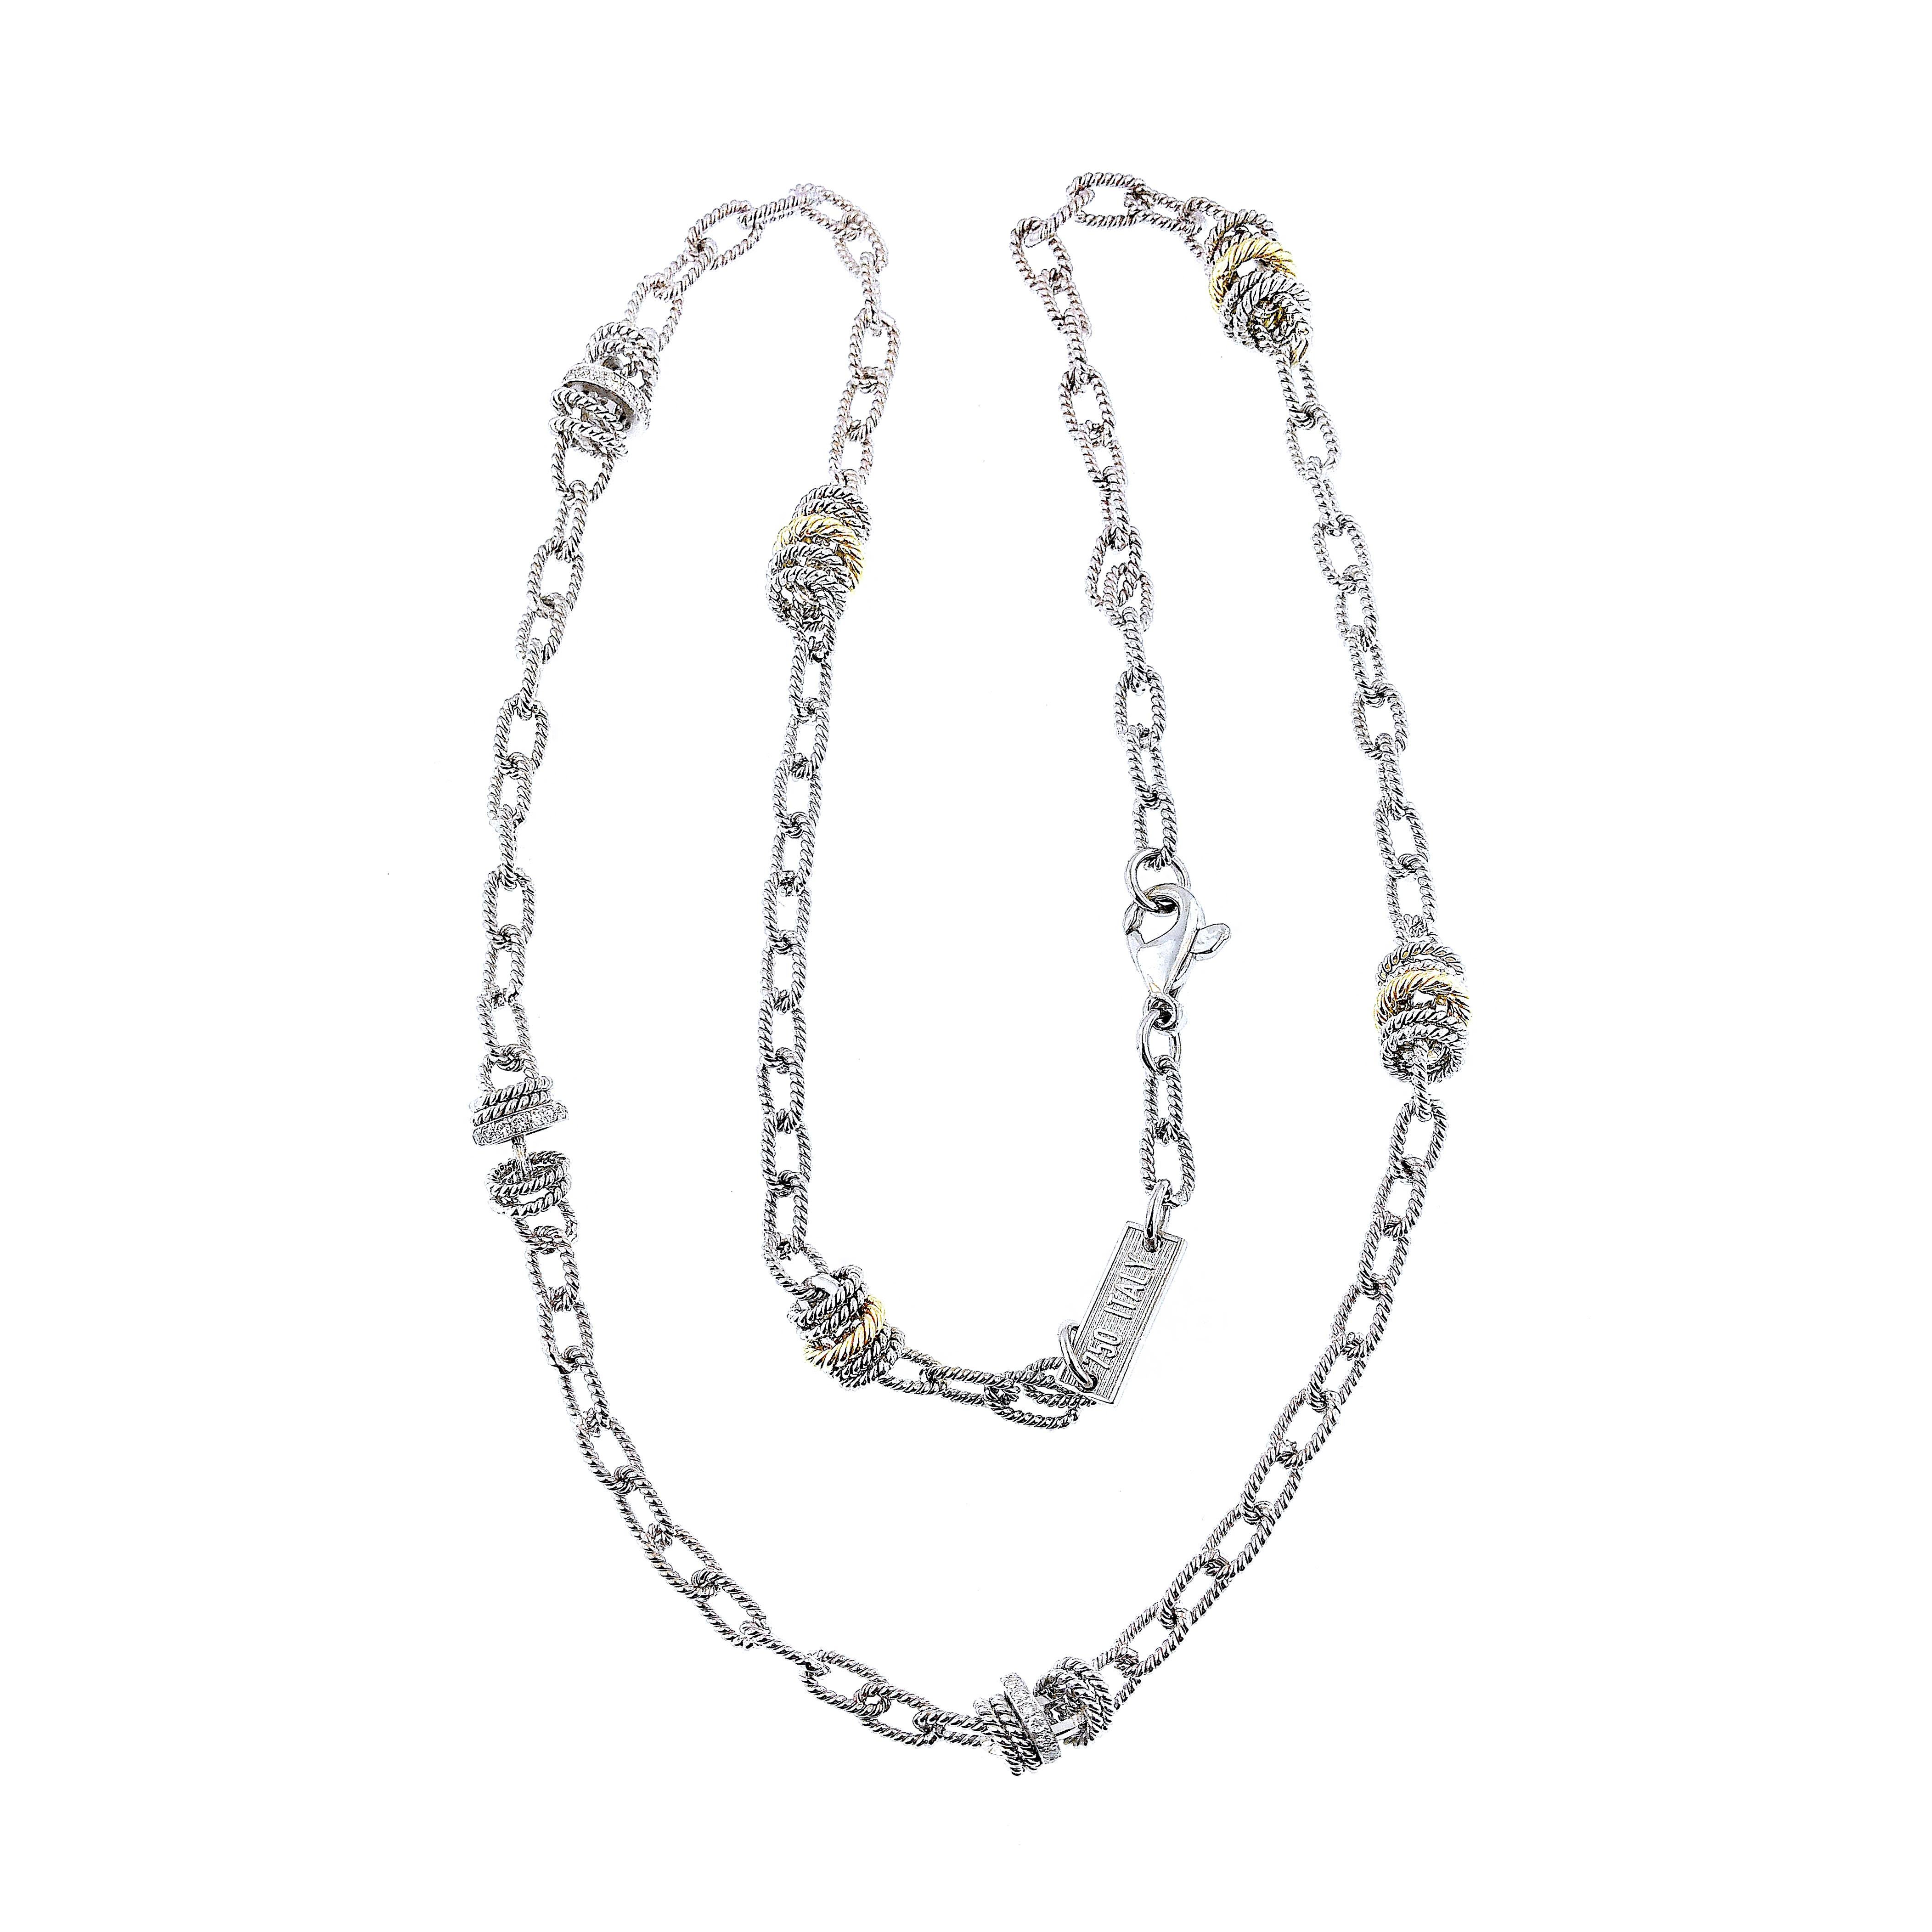 Produced by award winning Italian designer Stefano Vitolo. Stefano creates custom artisanal one of a kind jewelry with excellent gemstones in a truly old world Italian craftmanship.
This handcrafted chain has 0.53 total carat weight of F/G color, VS